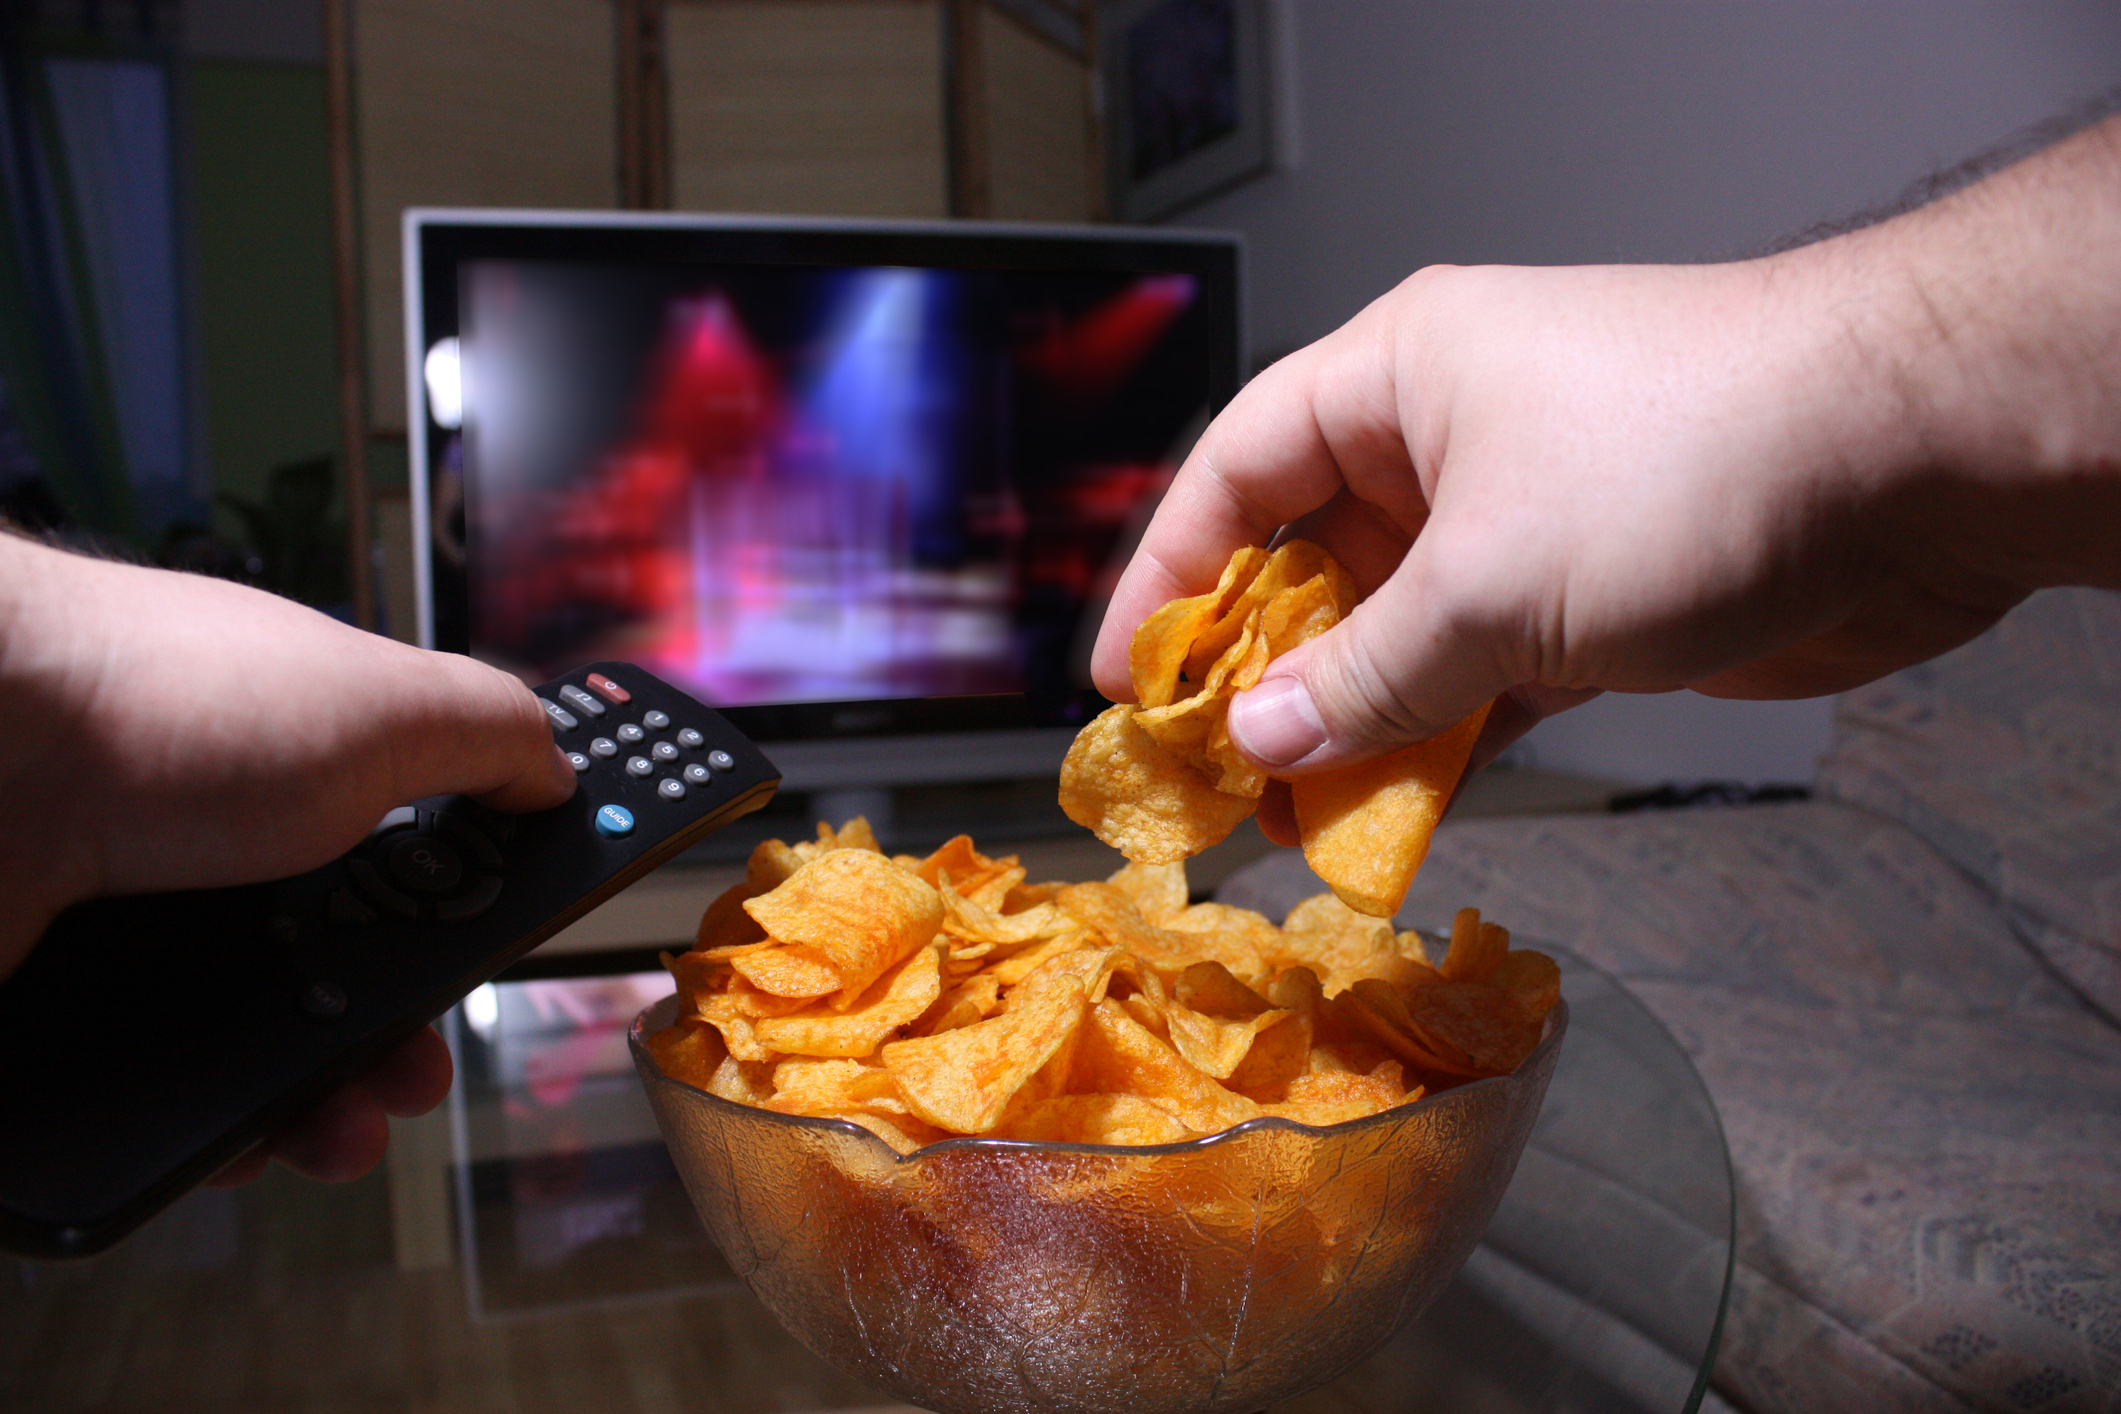 Chips and TV